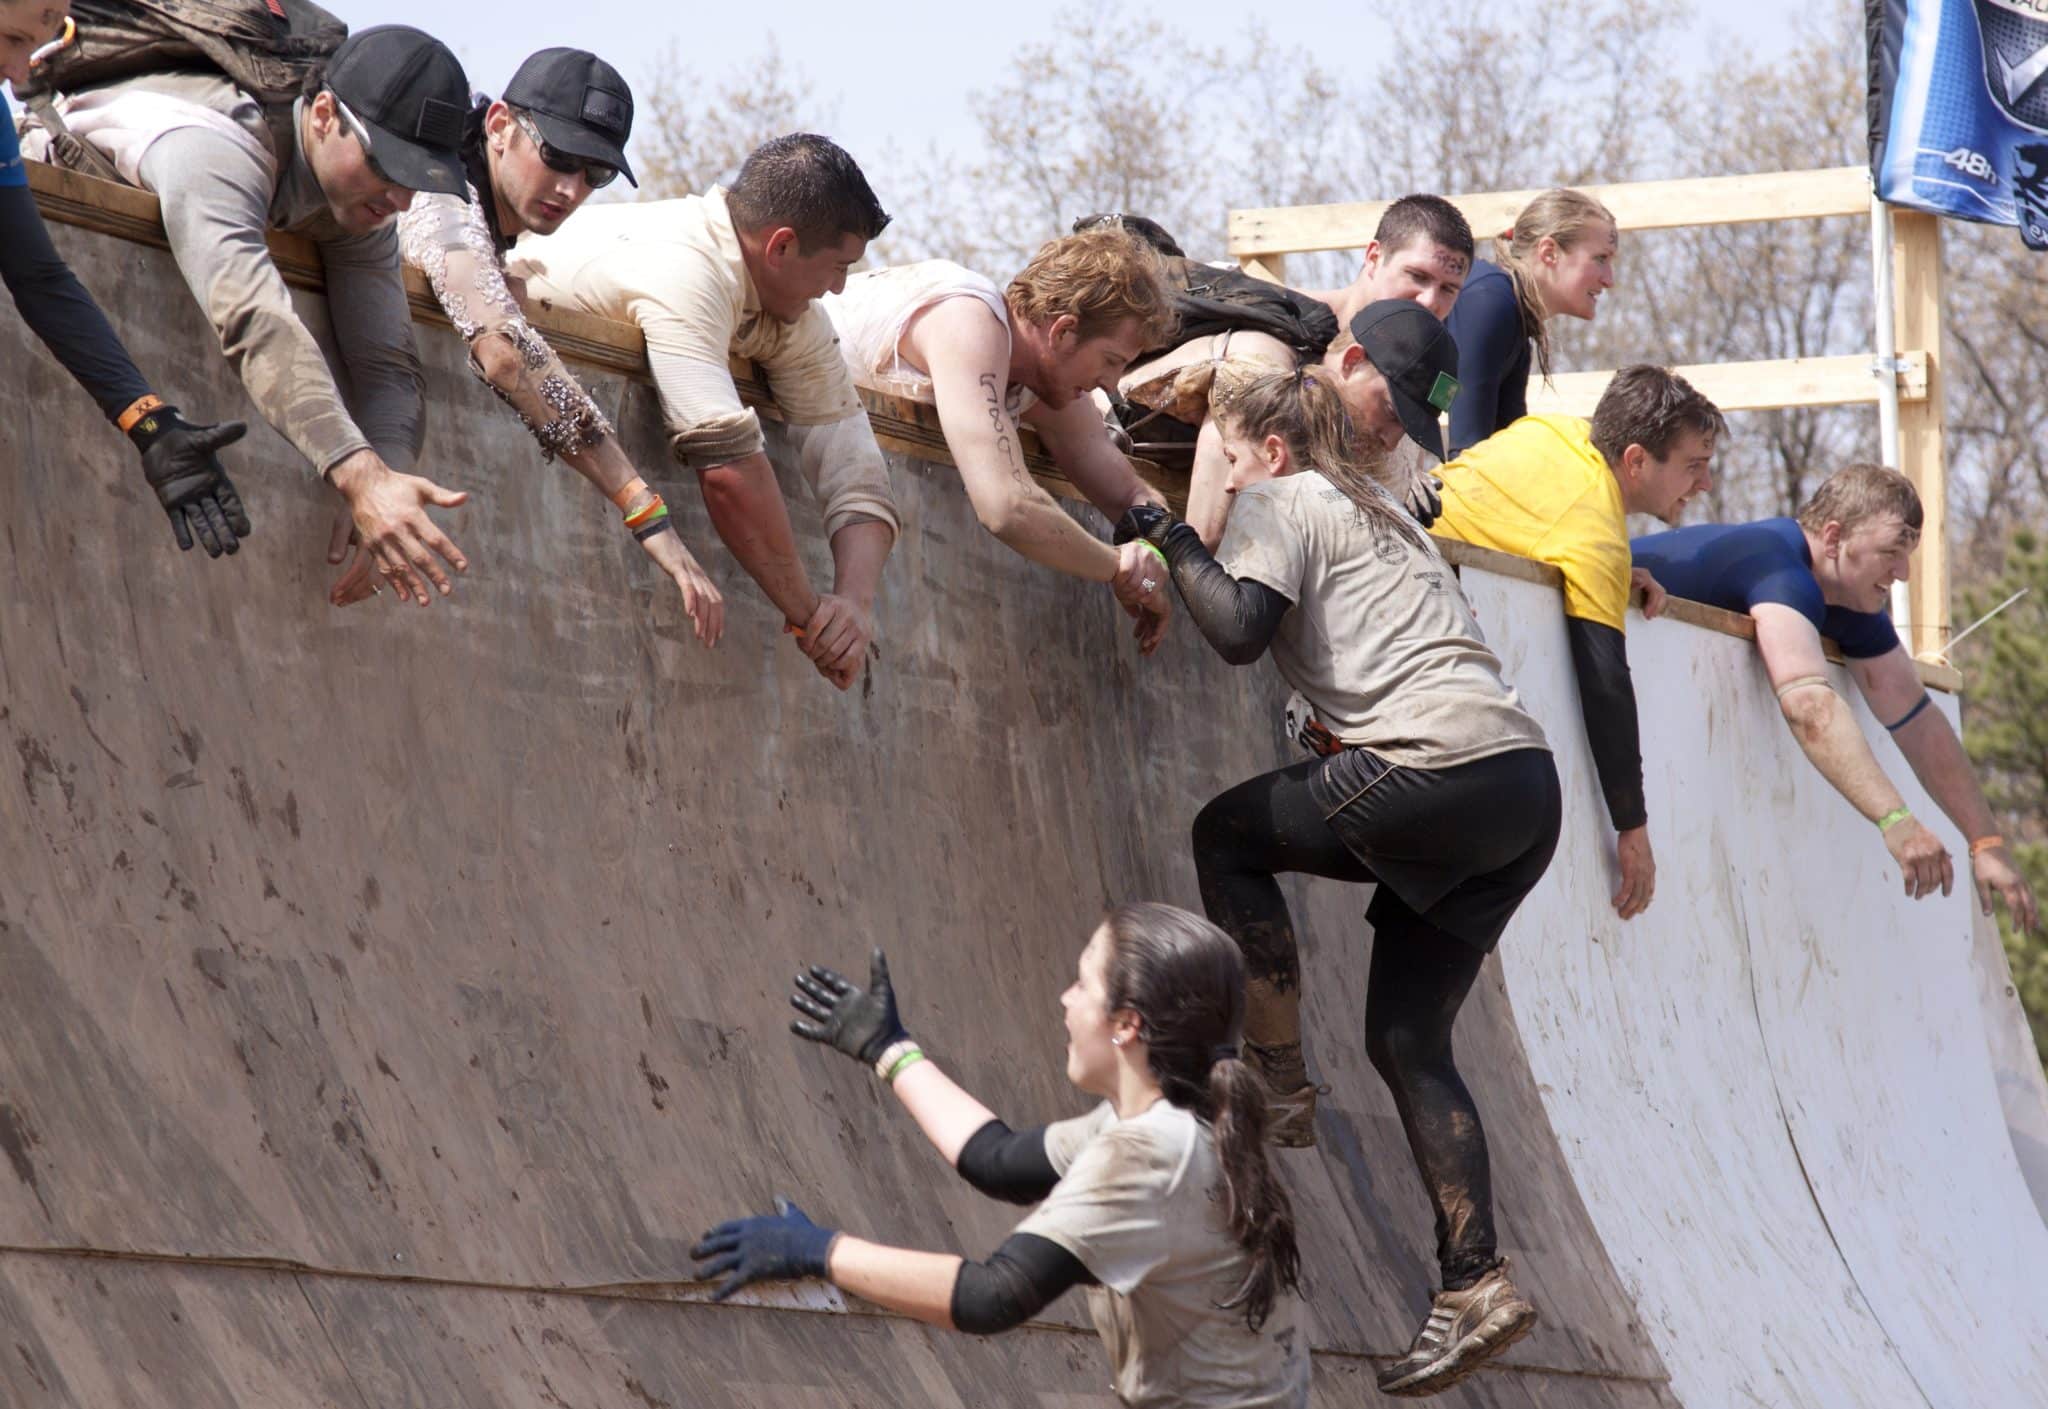 Image of a participants attempting to overcome a Tough Mudder obstacle